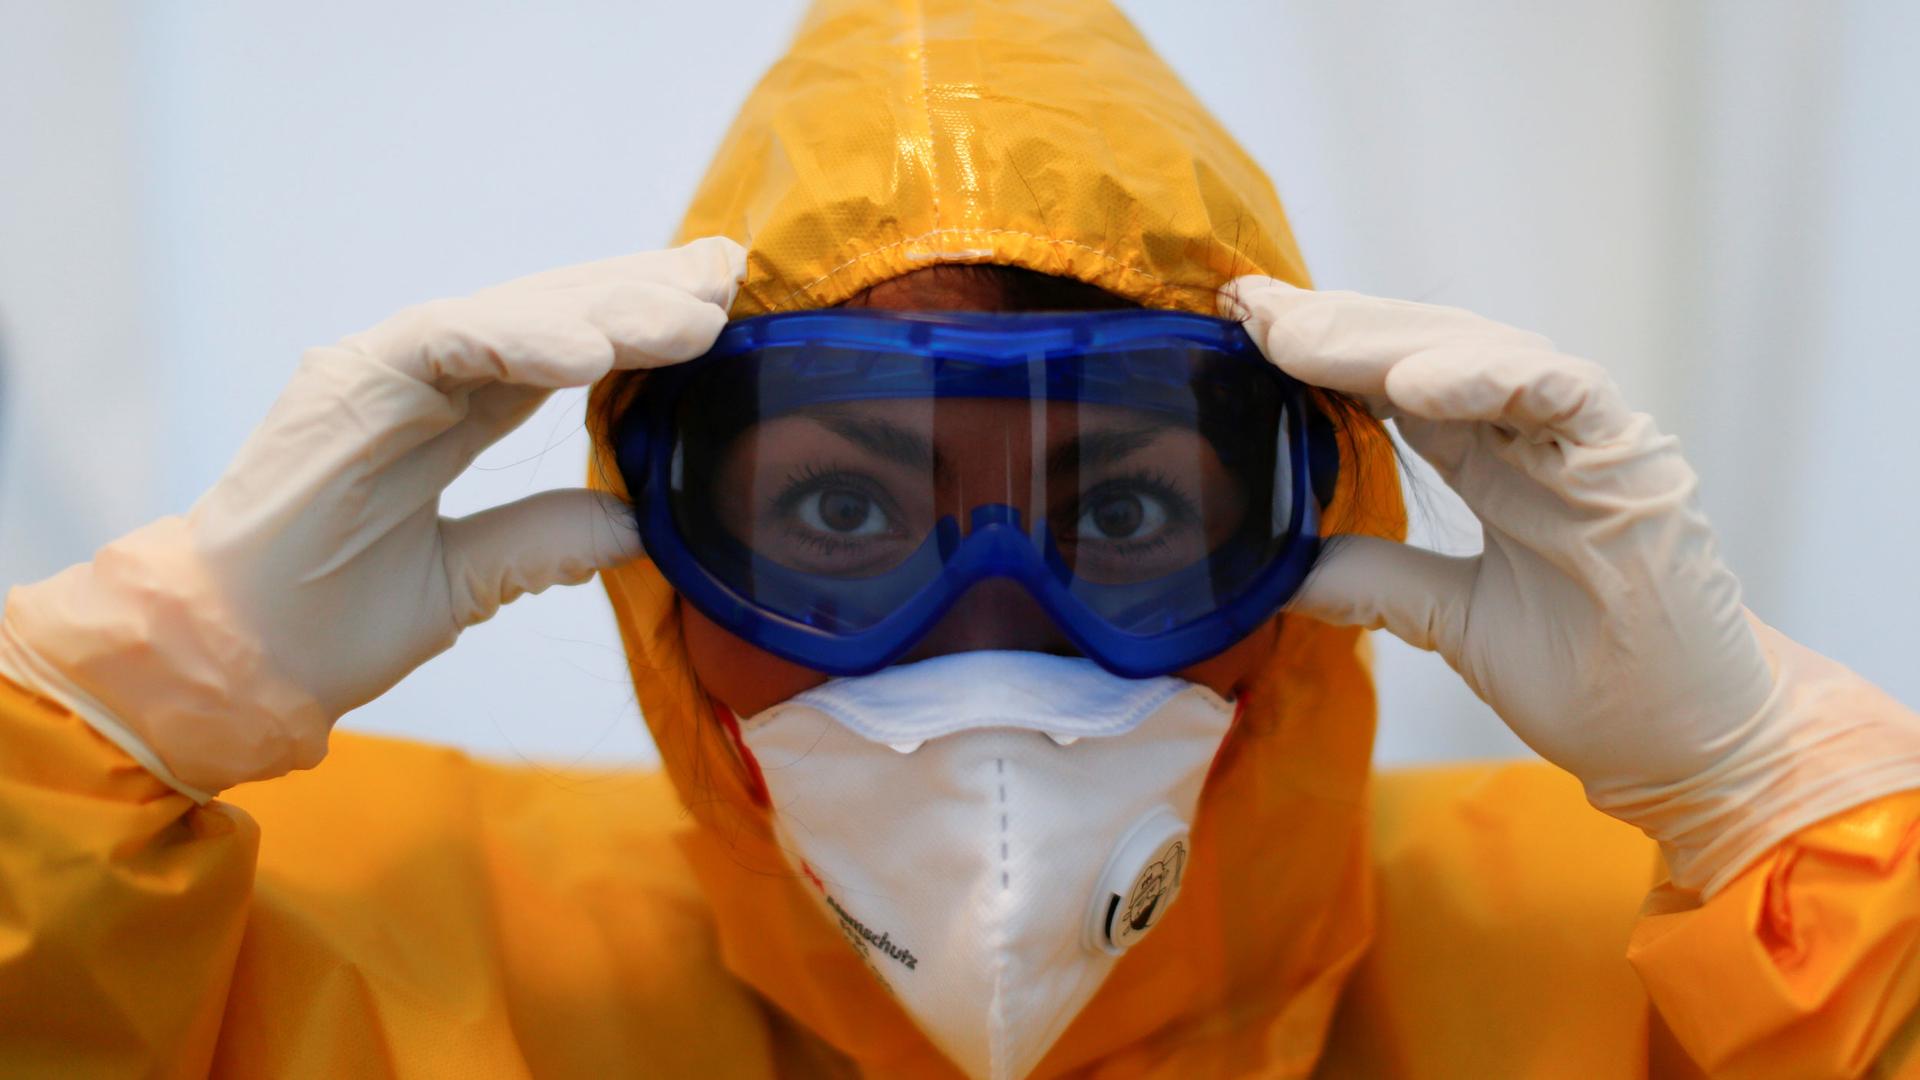 A health care worker is shown in a closeup photographer wearing protective goggles, face mask and a medical gown.